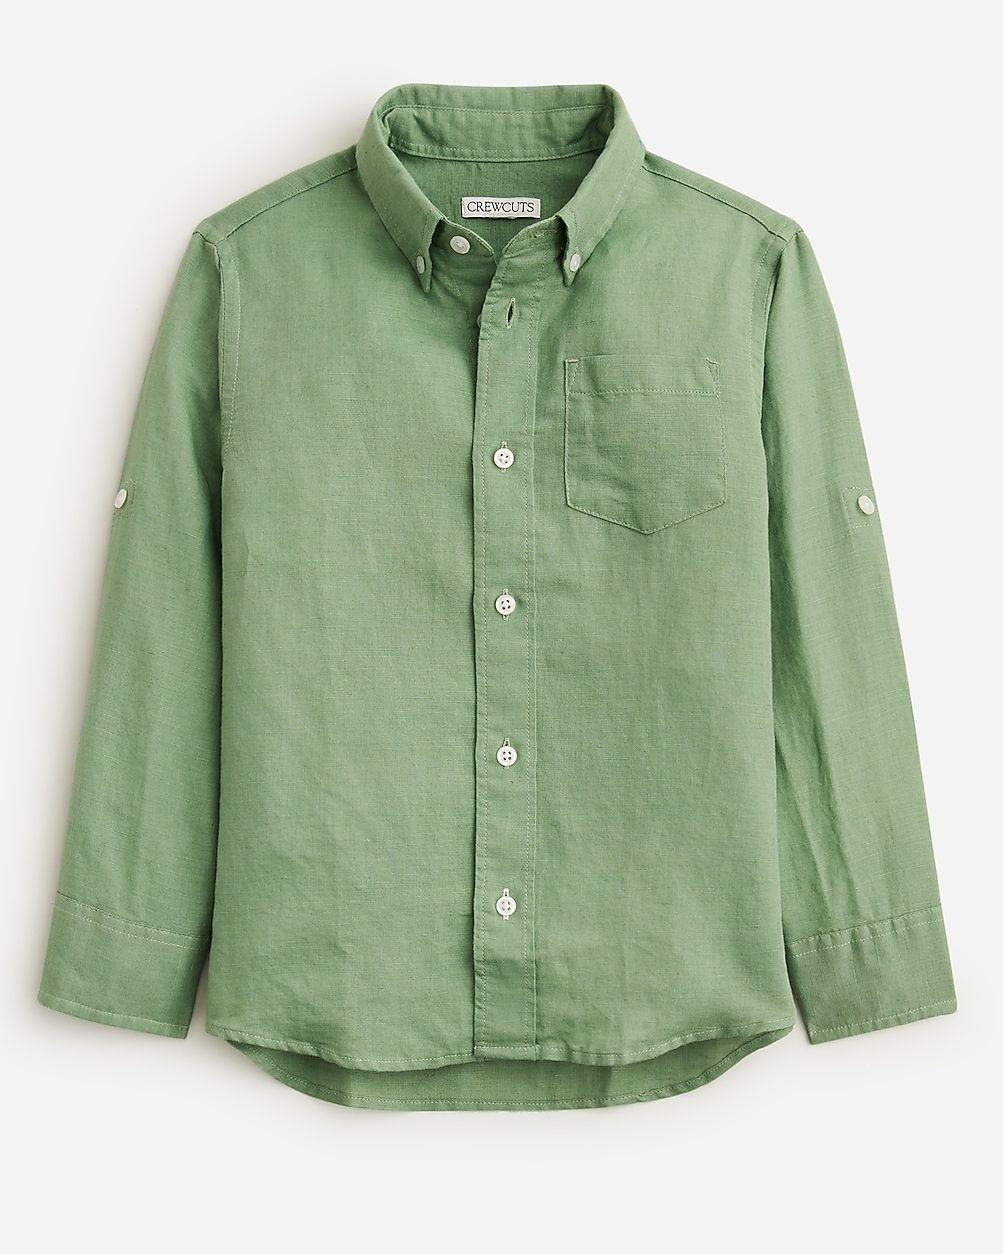 Kids' long-sleeve button-down linen shirt with sleeve tabs | J.Crew US